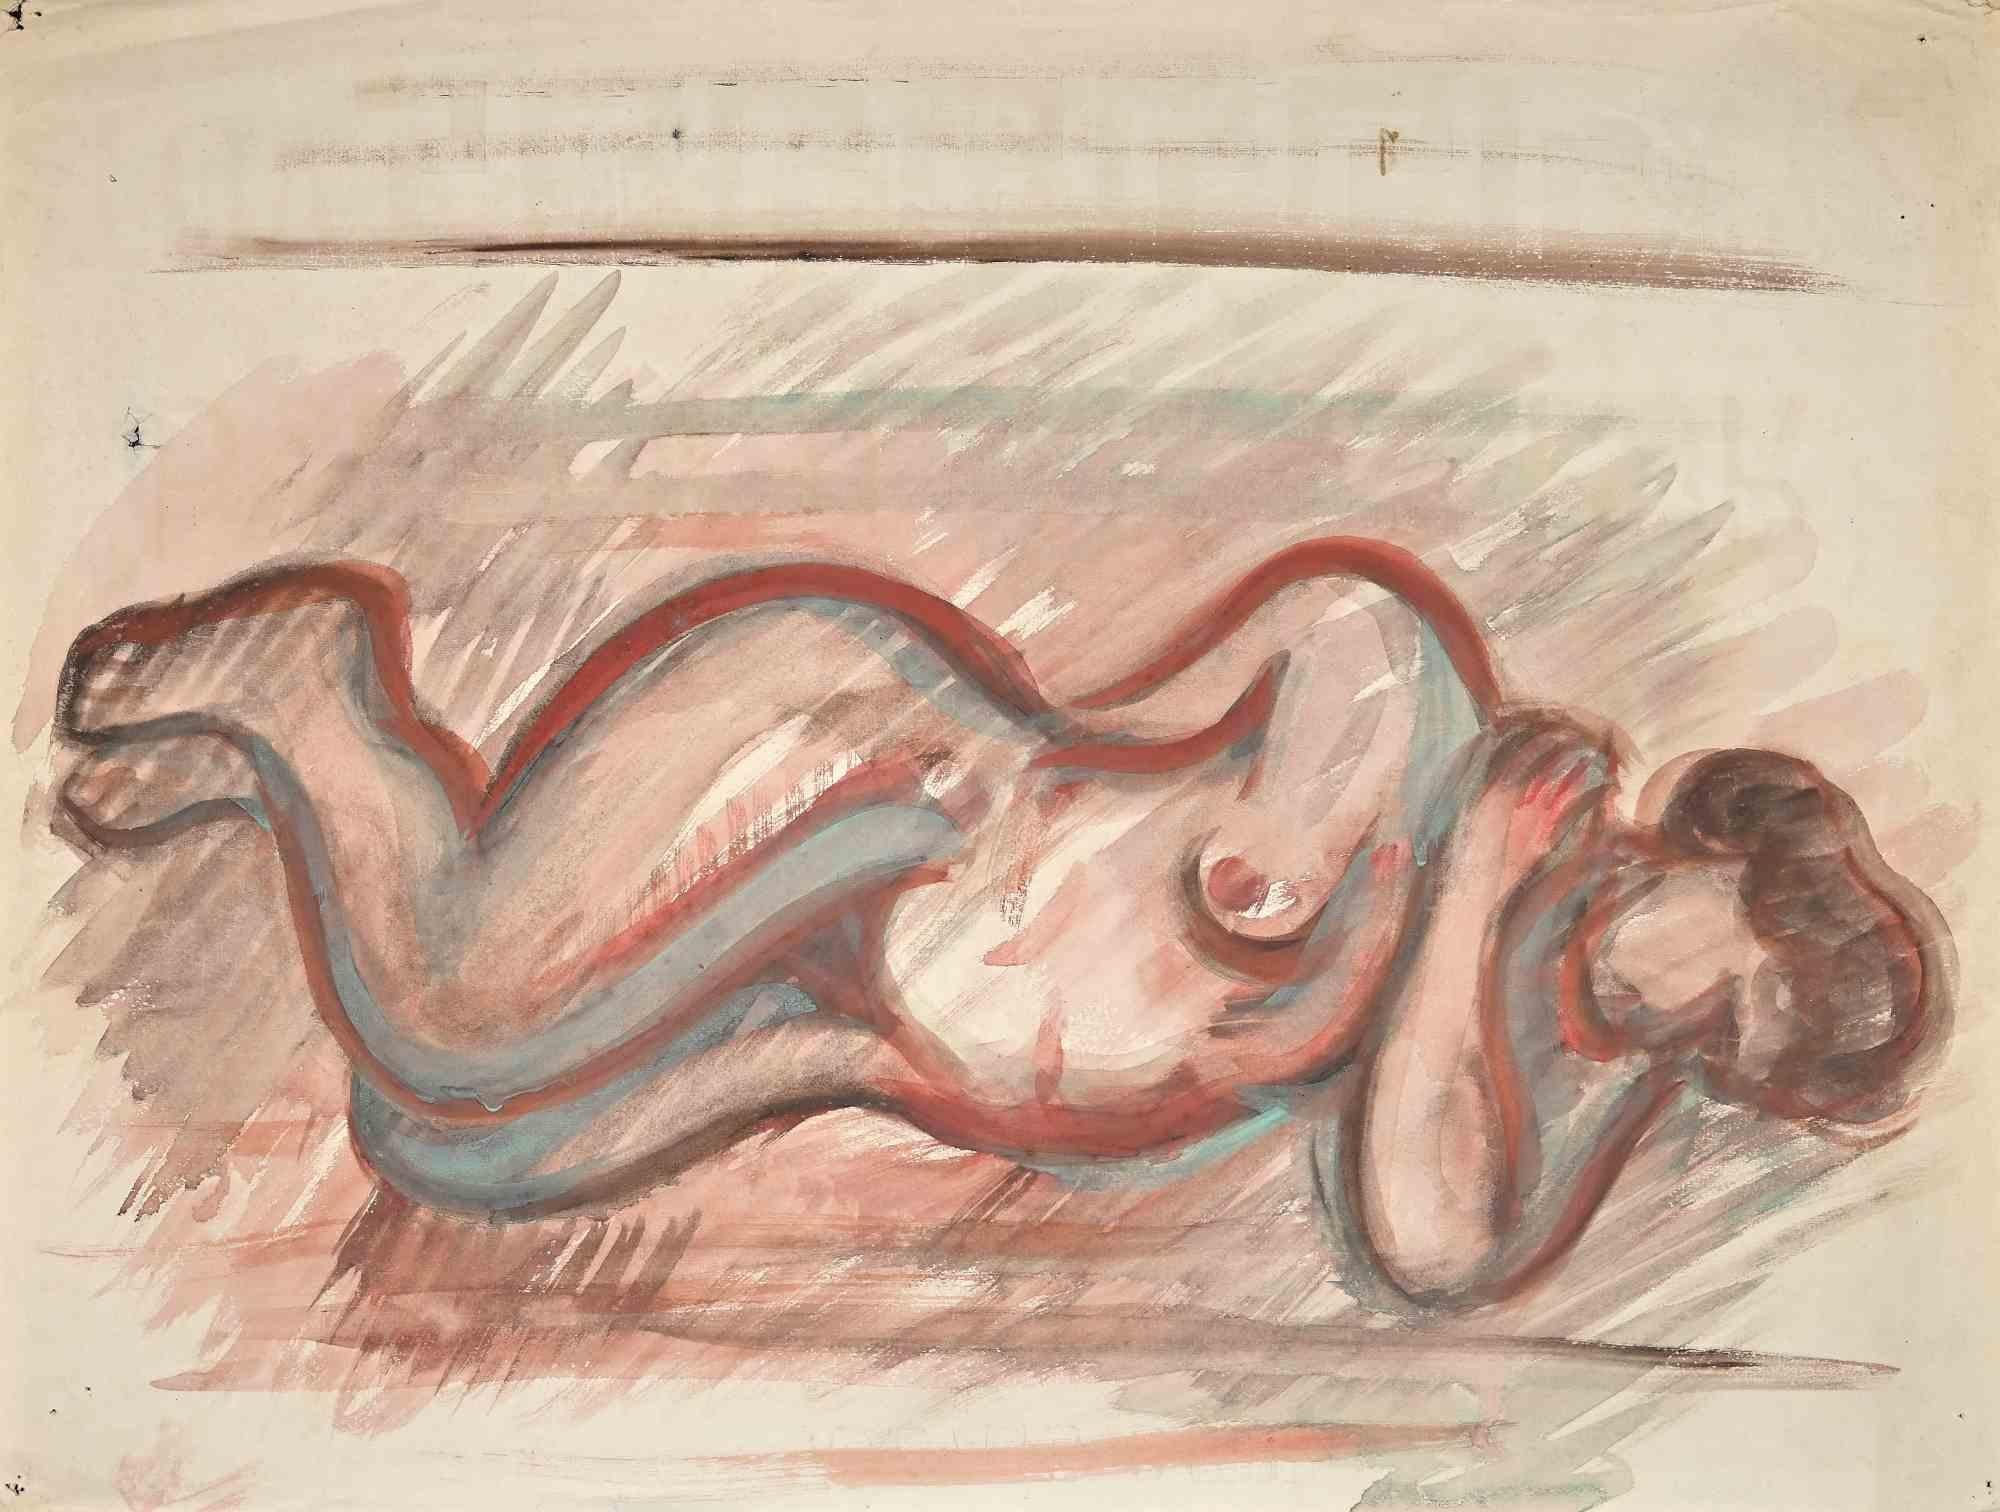 Reclined Nude is a drawing in watercolor, realized in the Mid-20th Century by Jean Delpech (1916-1988). 

Good conditions with minor folding and cuts on the margins.

The artwork is realized in harmonious and congruence colors through